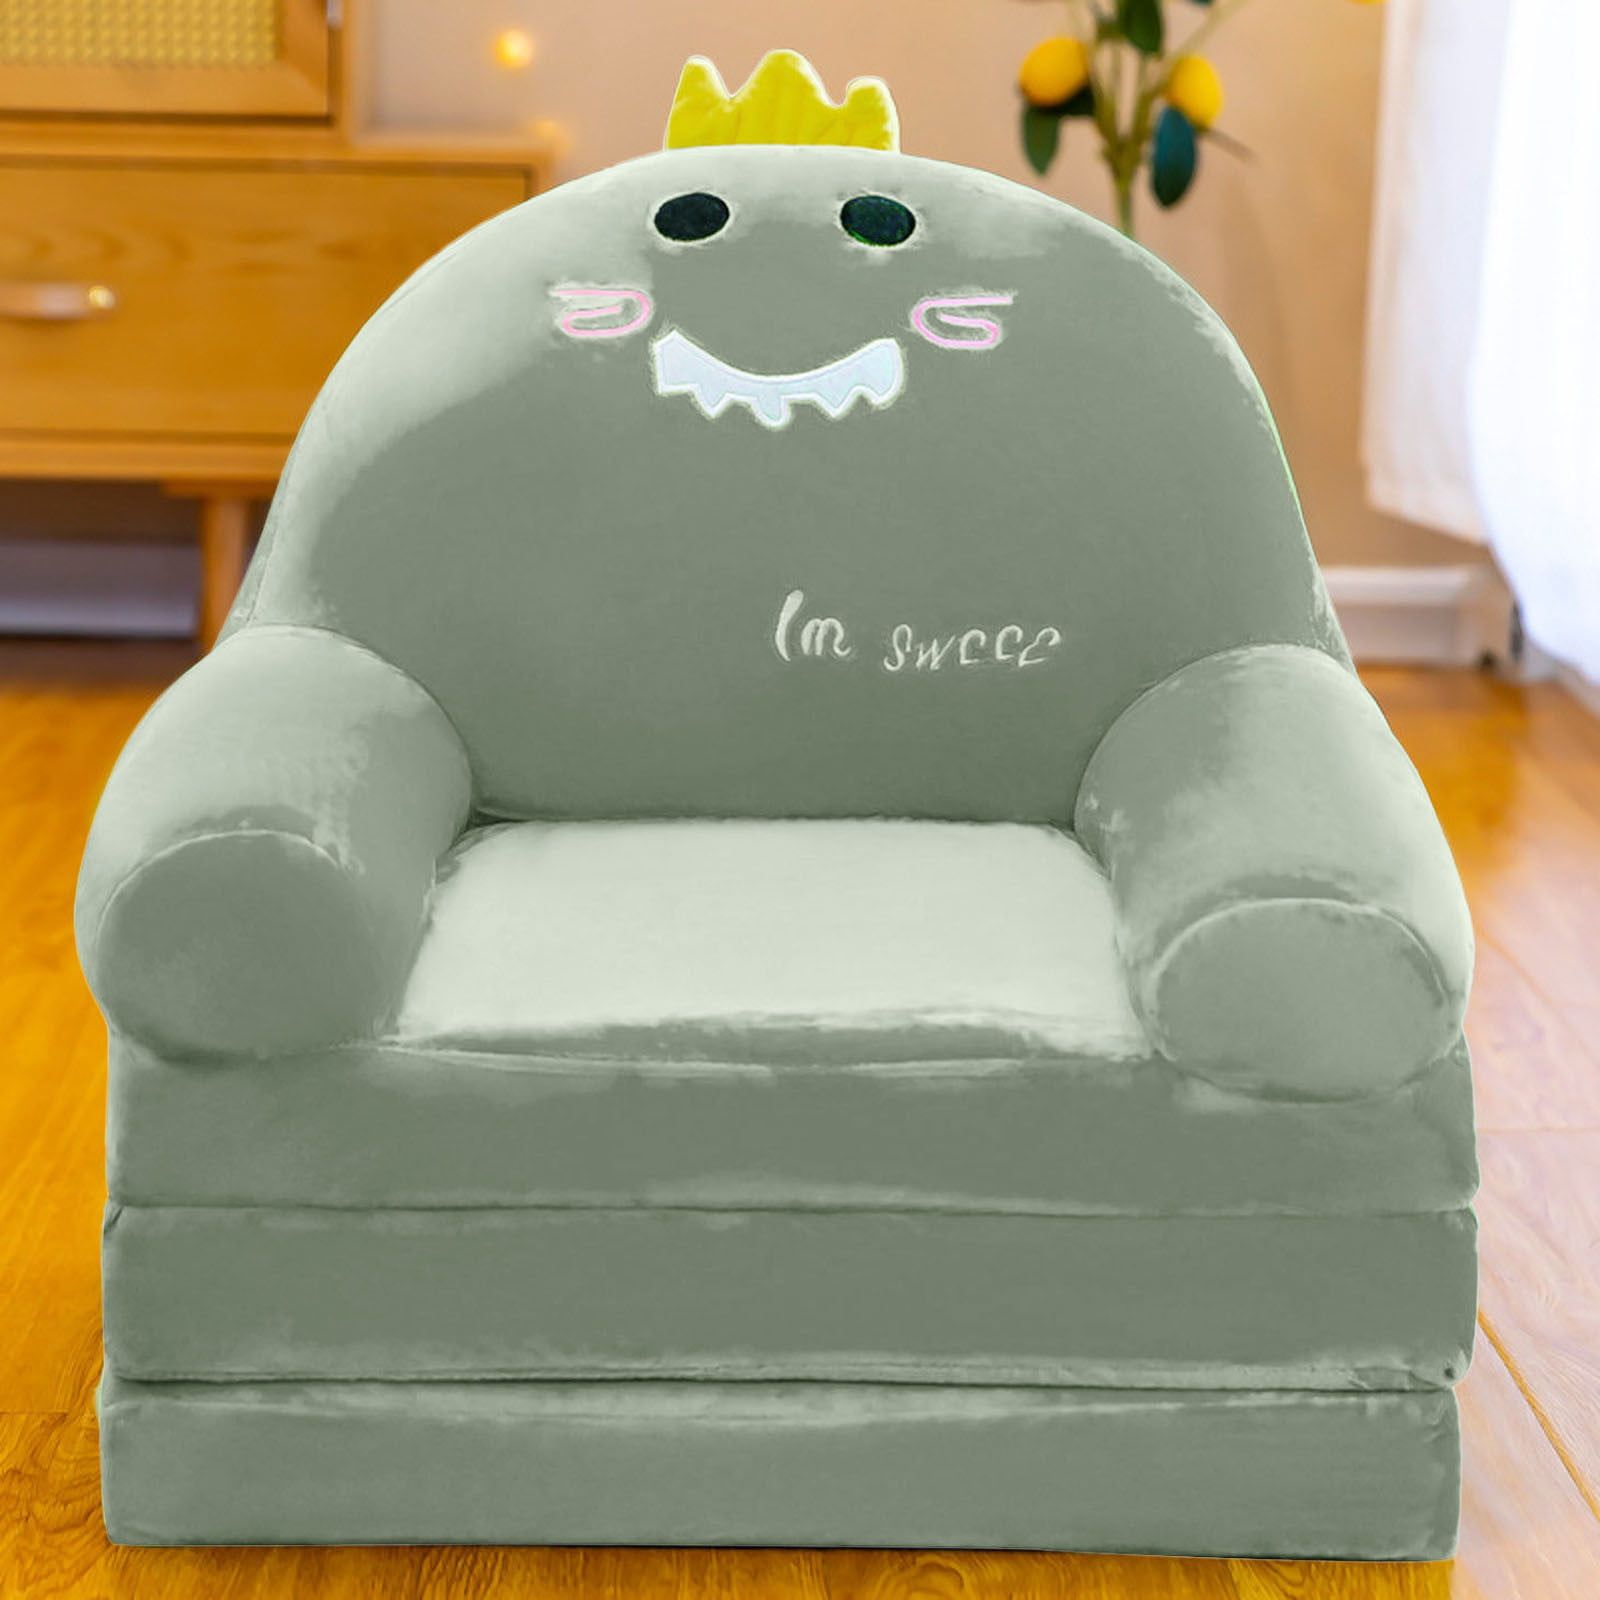 Plush Foldable Kids Sofa Backrest 2 In 1 Foldable Sofa Cute Cartoon Within 2 In 1 Foldable Sofas (Gallery 19 of 20)